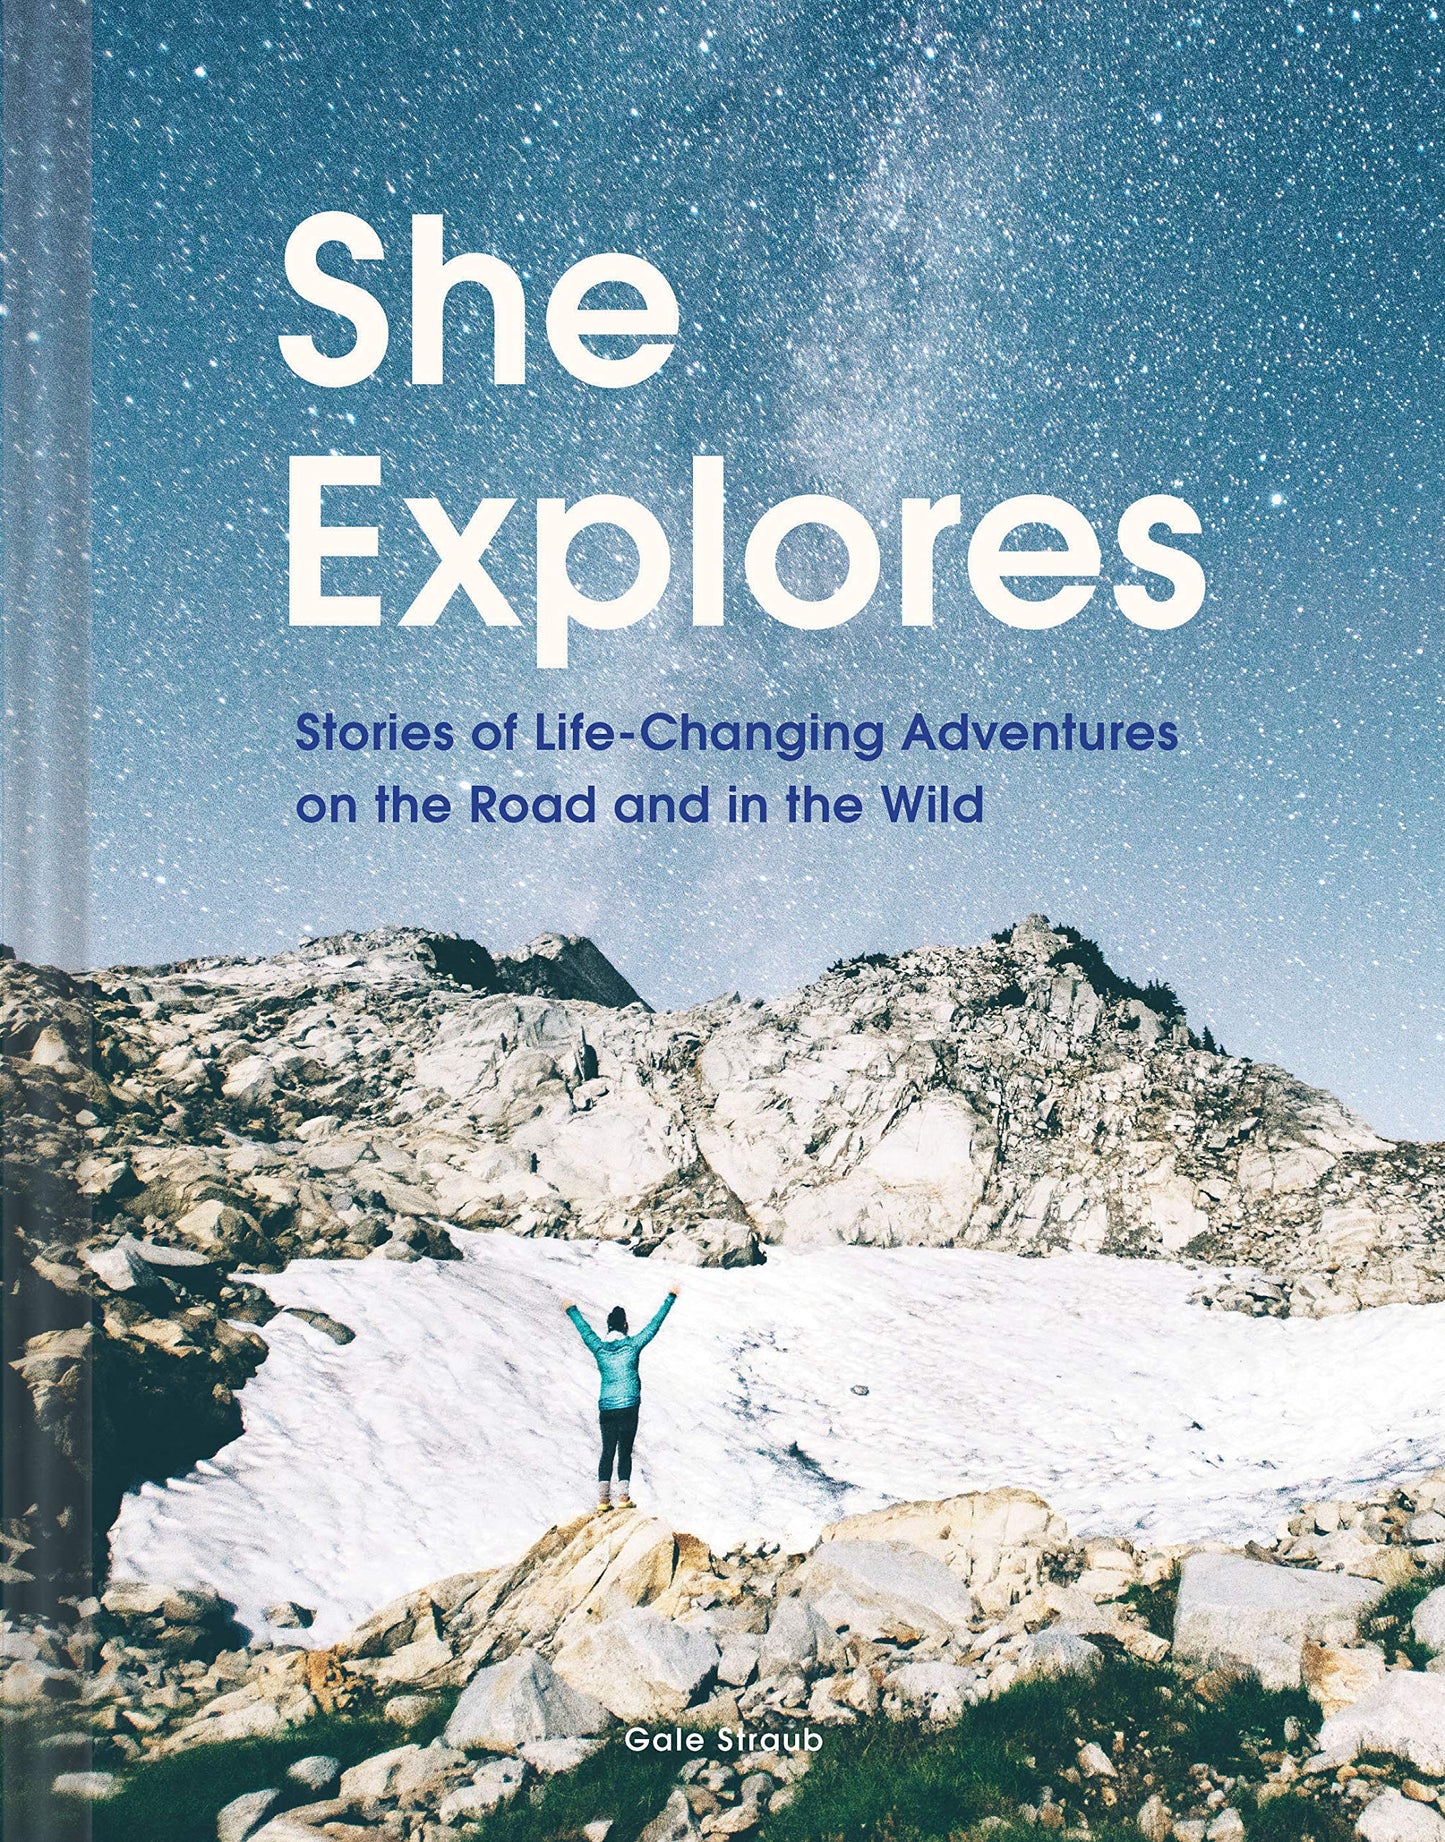 She Explores: Stories of Life-Changing Adventures on the Road and in the Wild by Gale Straub